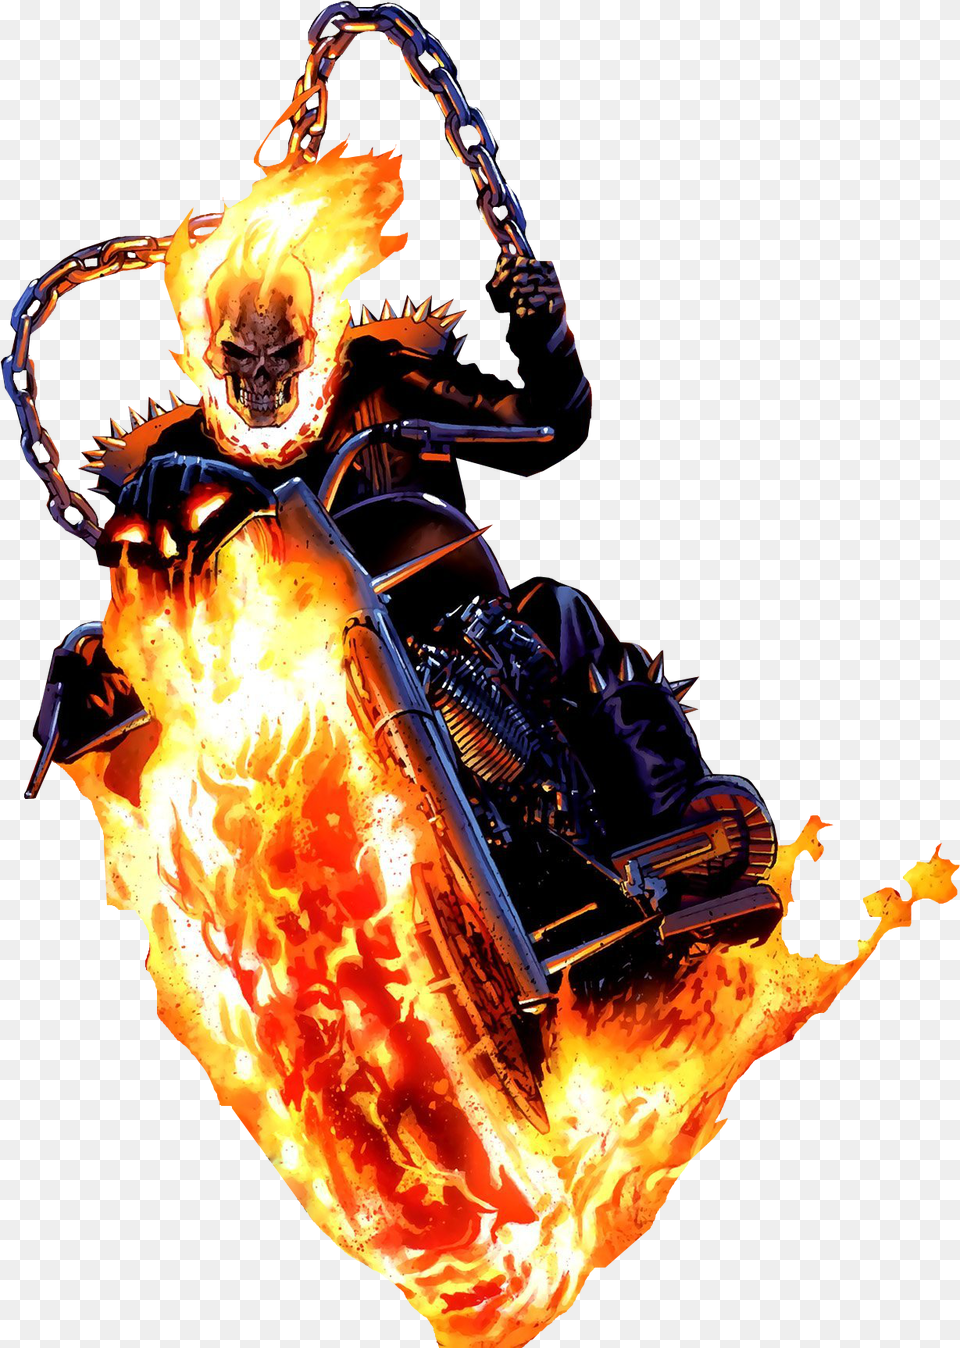 All Worlds Alliance Wiki Marvel Johnny Blaze Ghost Rider, Fire, Flame, Adult, Female Png Image